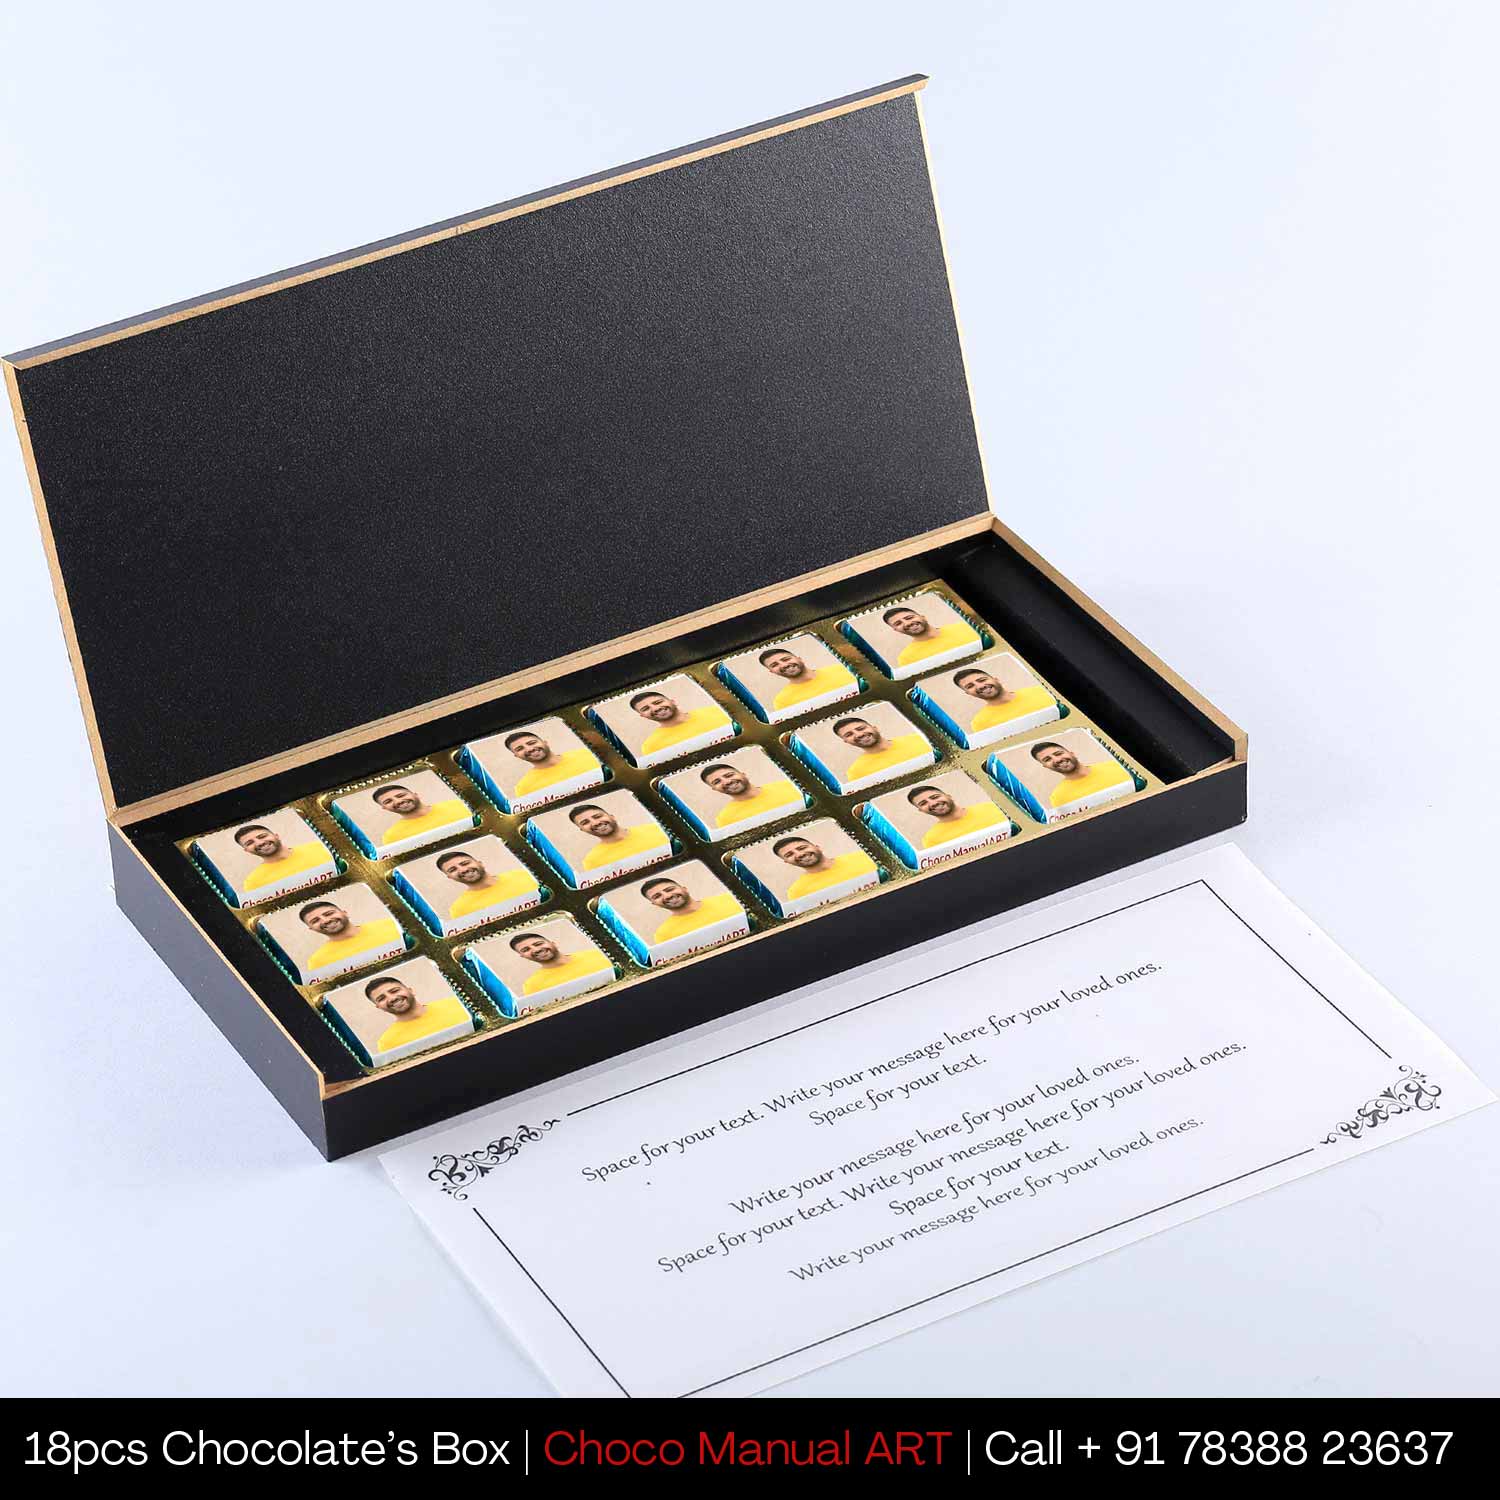 Personalised chocolates with photo and name print